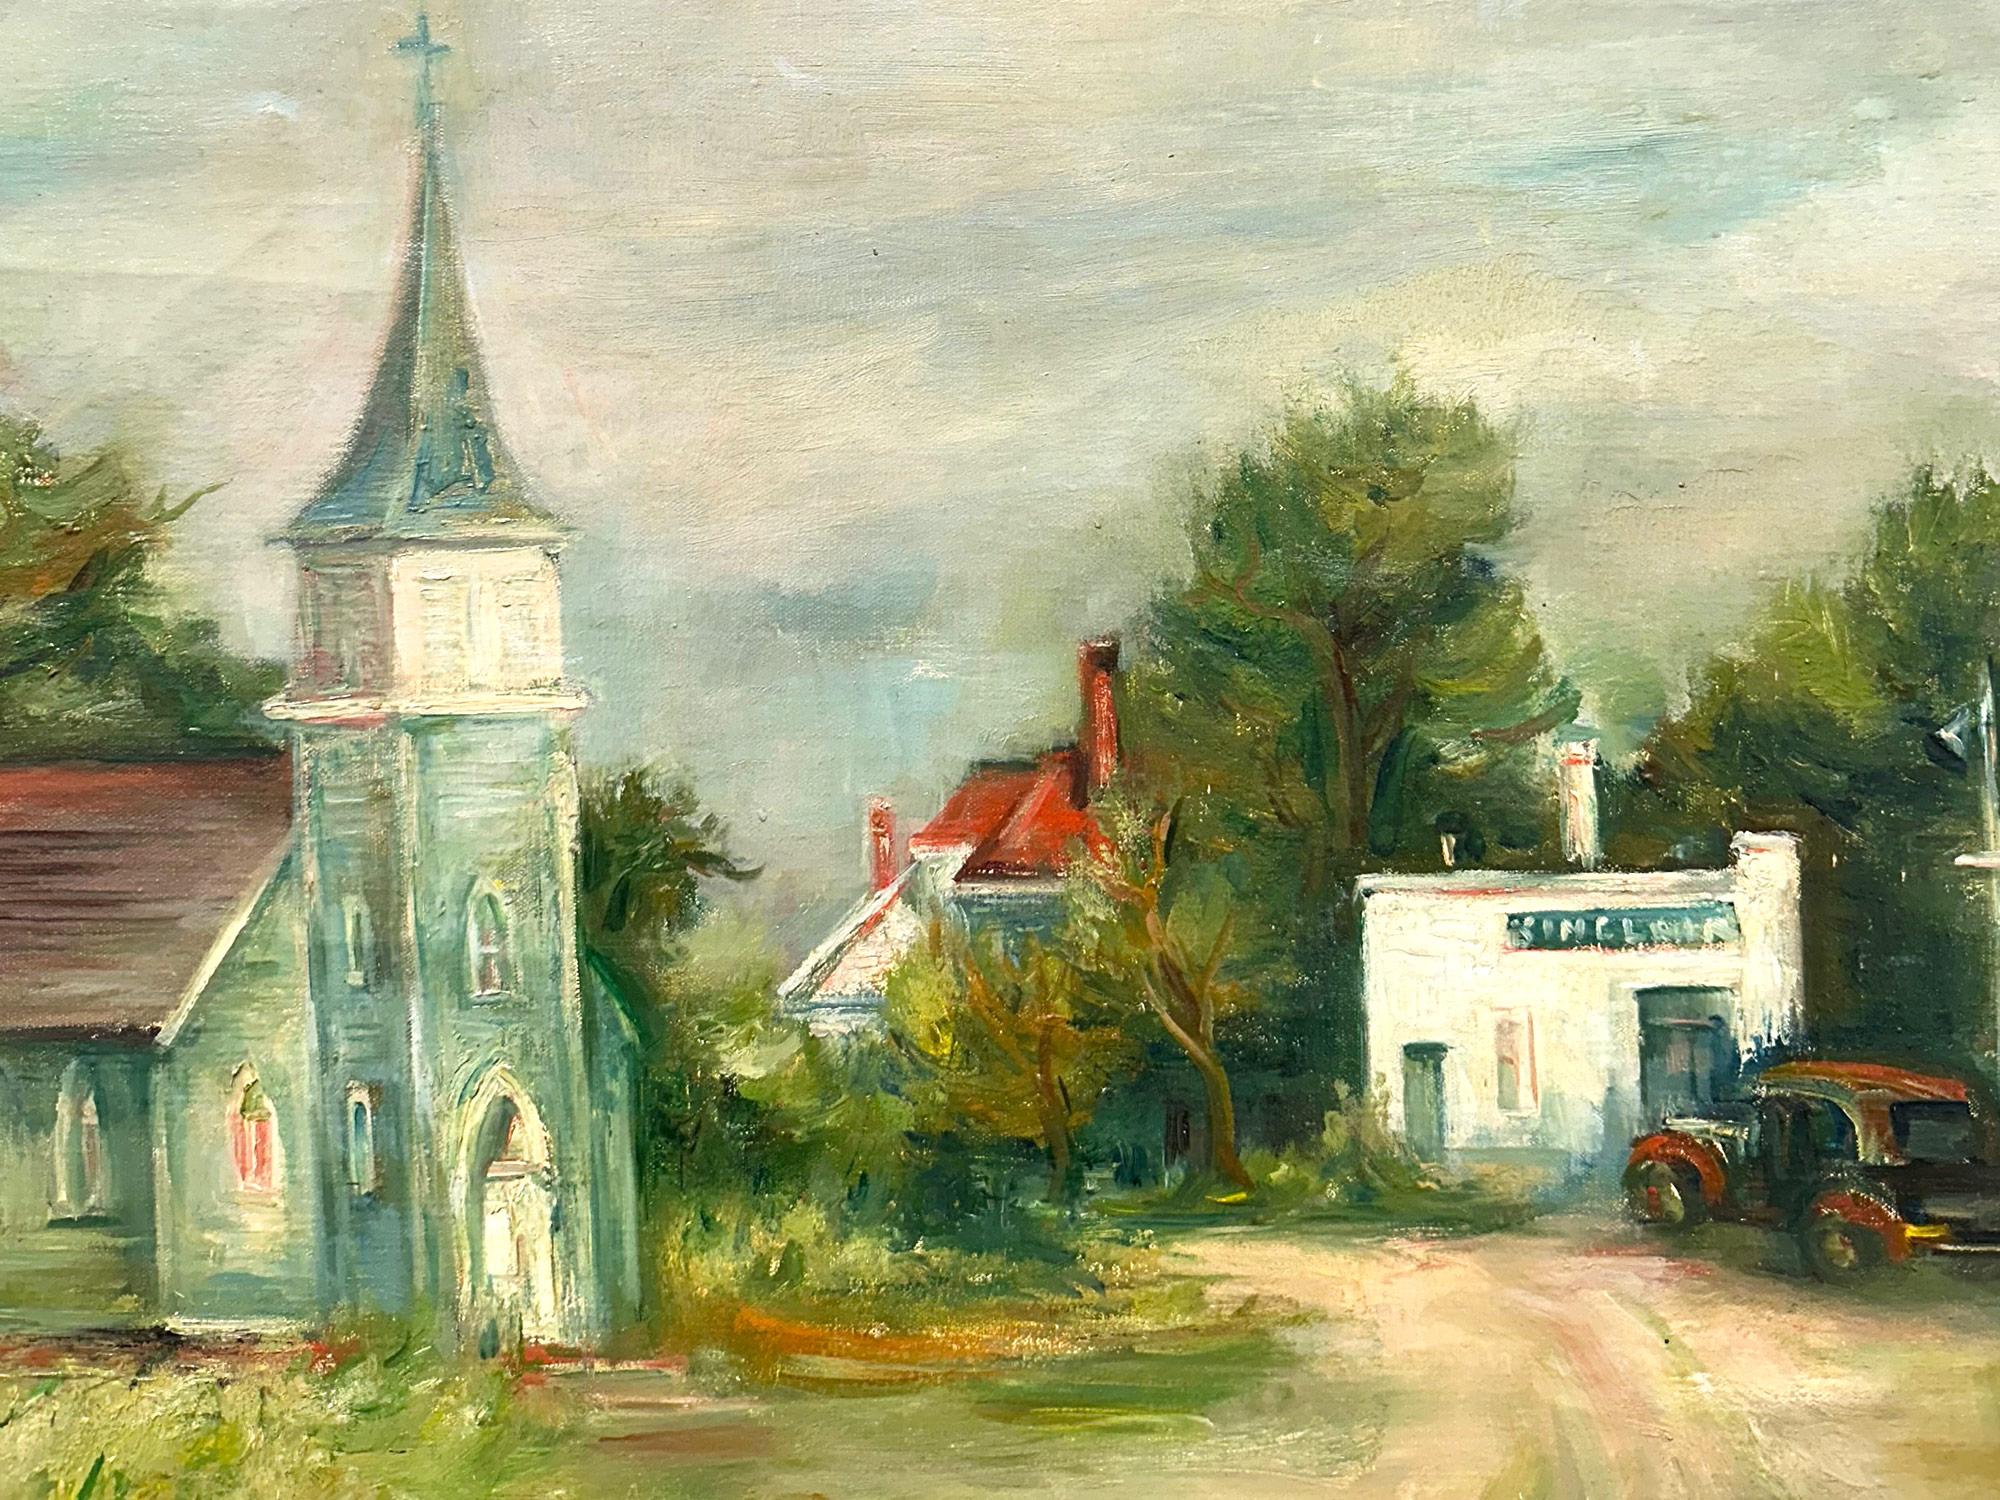 This painting depicts a whimsical landscape of the town's church and gas station with an old pick up truck. The pathway crossing through the town with the village houses in the distance is a charming sight. And just across lush trees encompass the